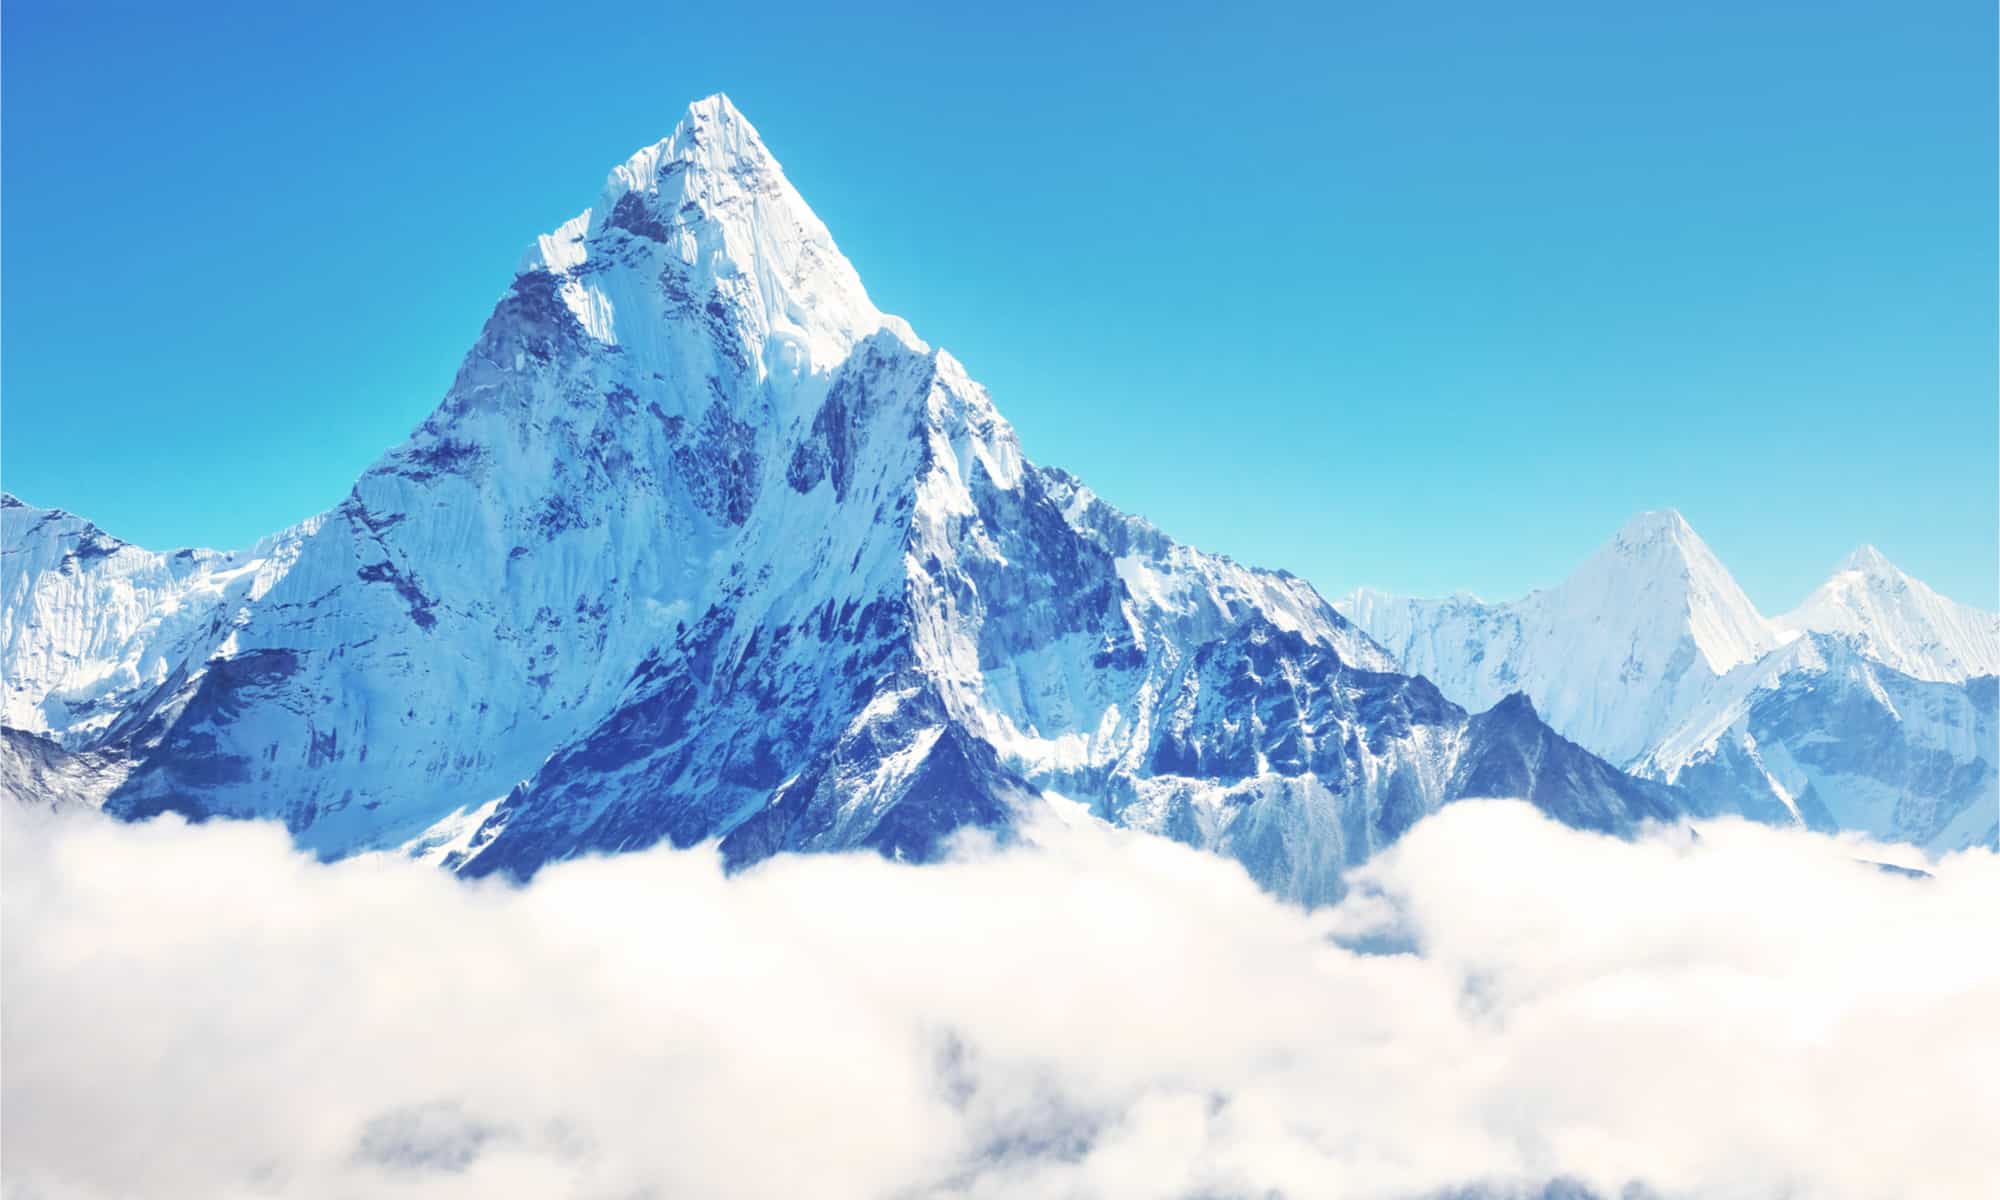 Is Mount Everest really the tallest mountain on Earth?